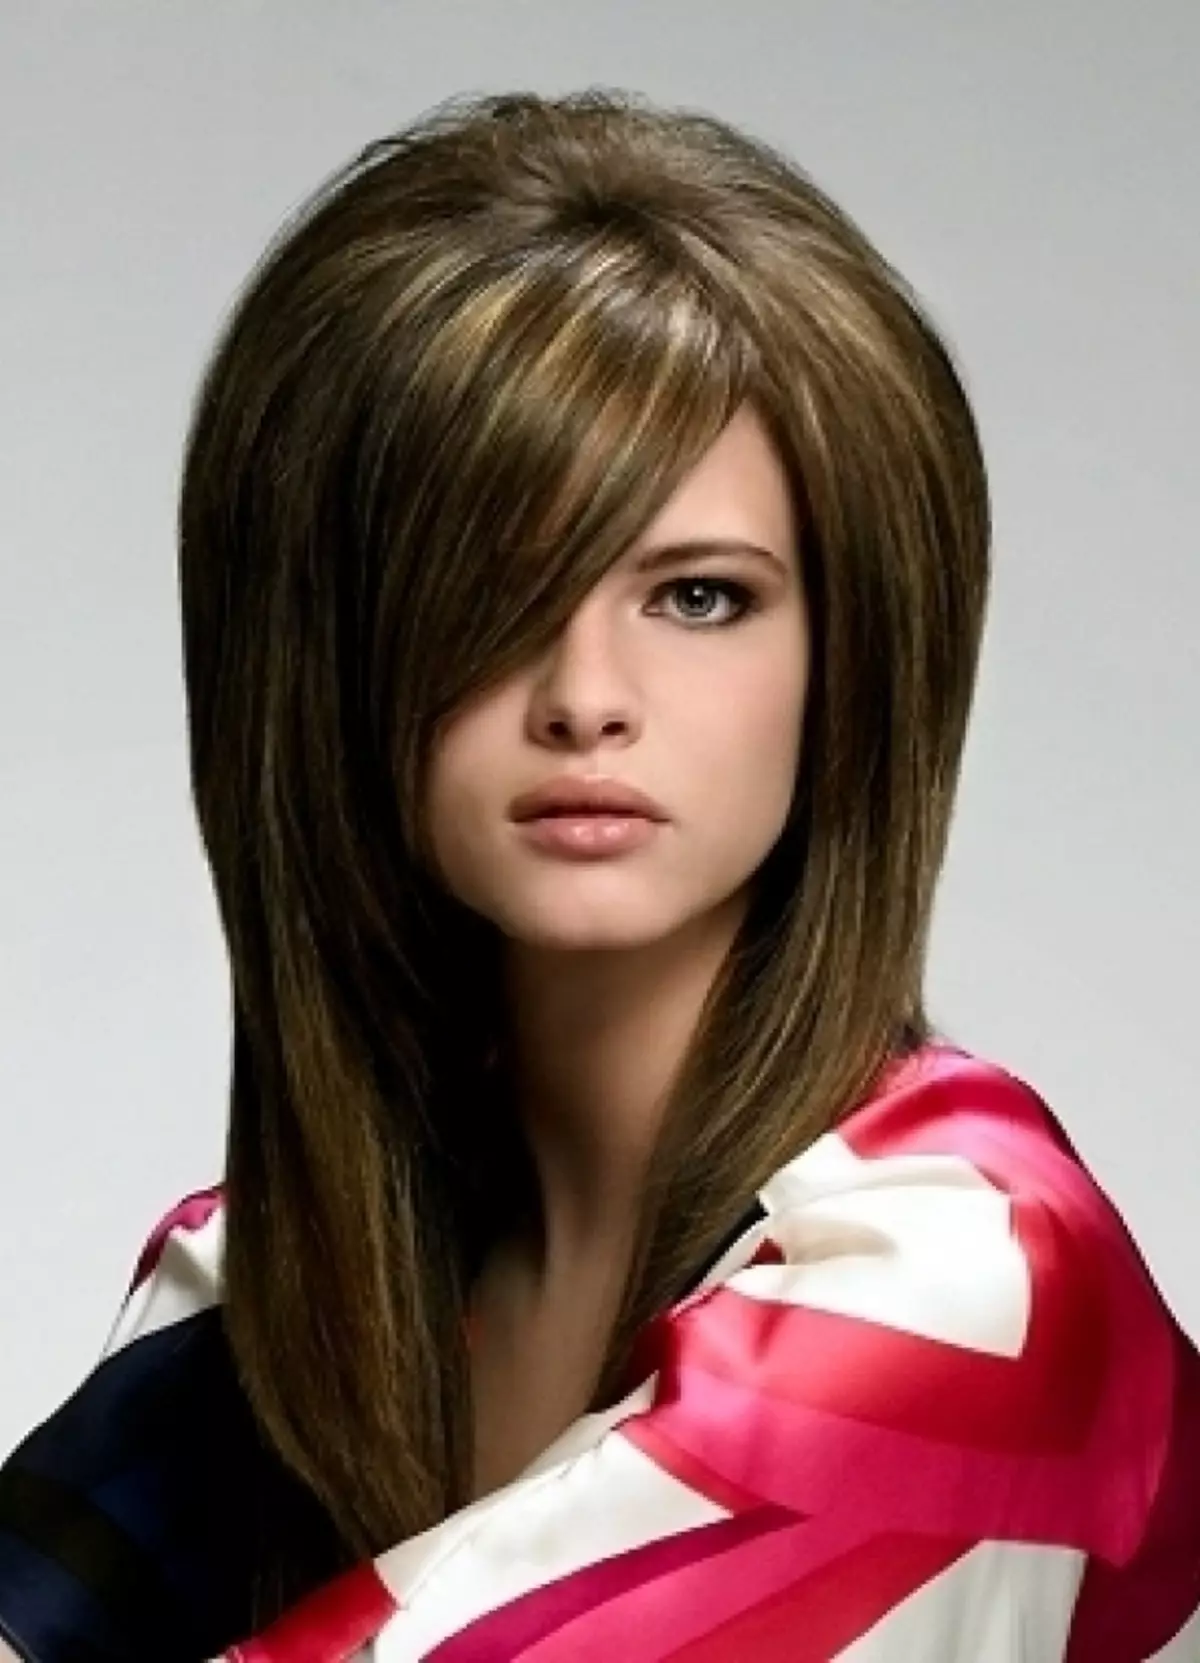 Youth haircuts (67 photos): Fashionable women's hairstyles for young people, stylish and modern haircuts for young girls with long and short hair 5900_25